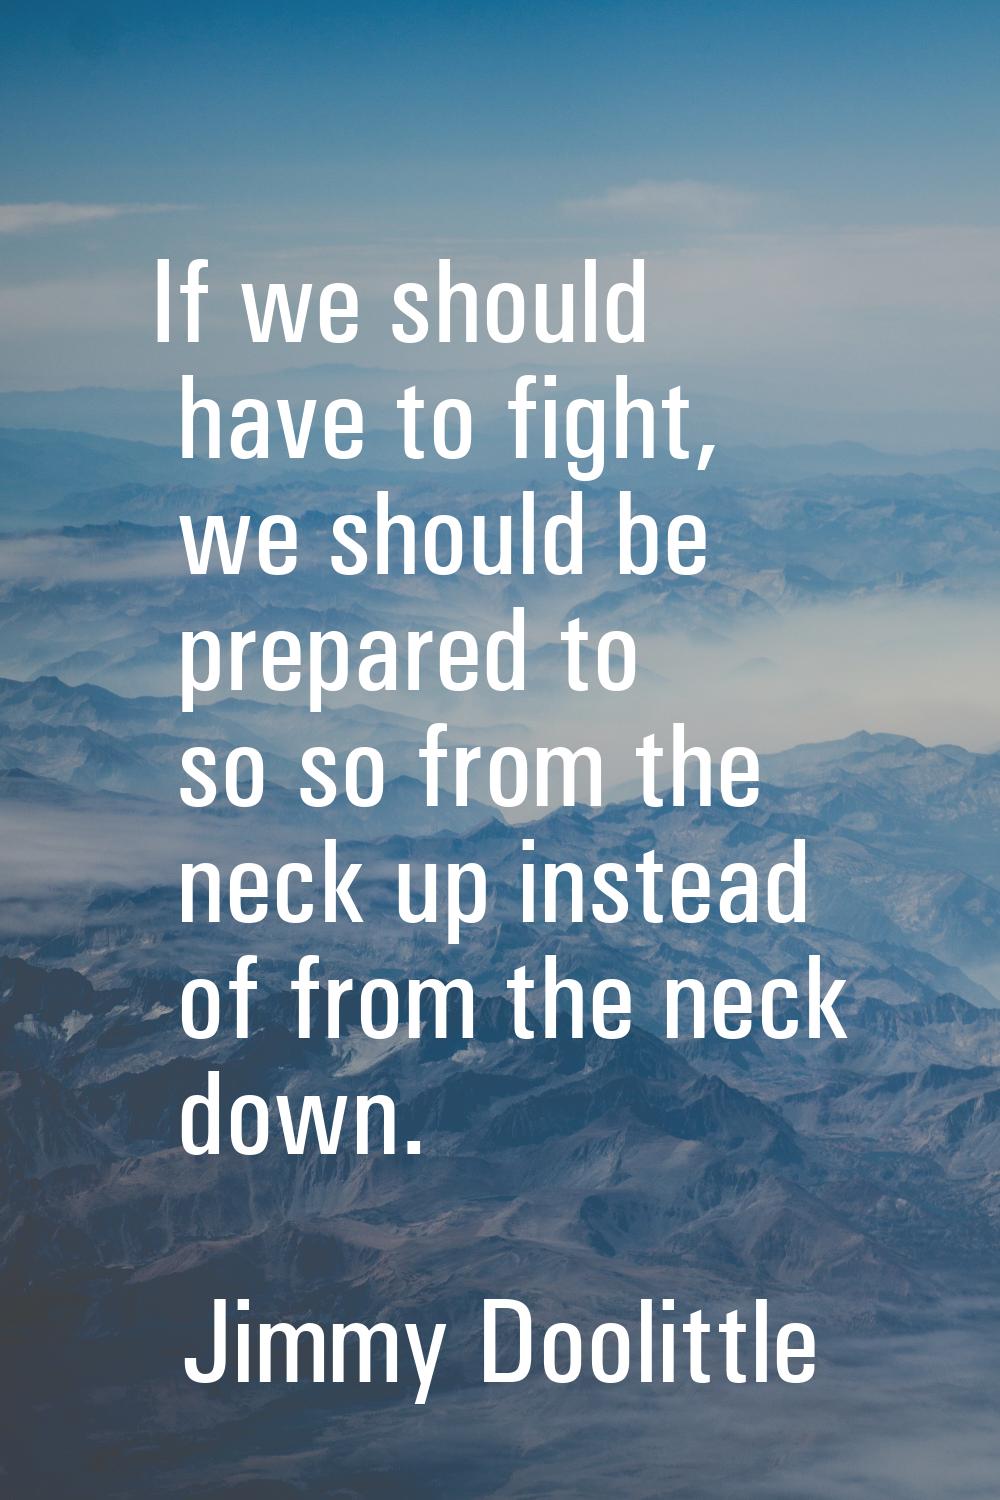 If we should have to fight, we should be prepared to so so from the neck up instead of from the nec